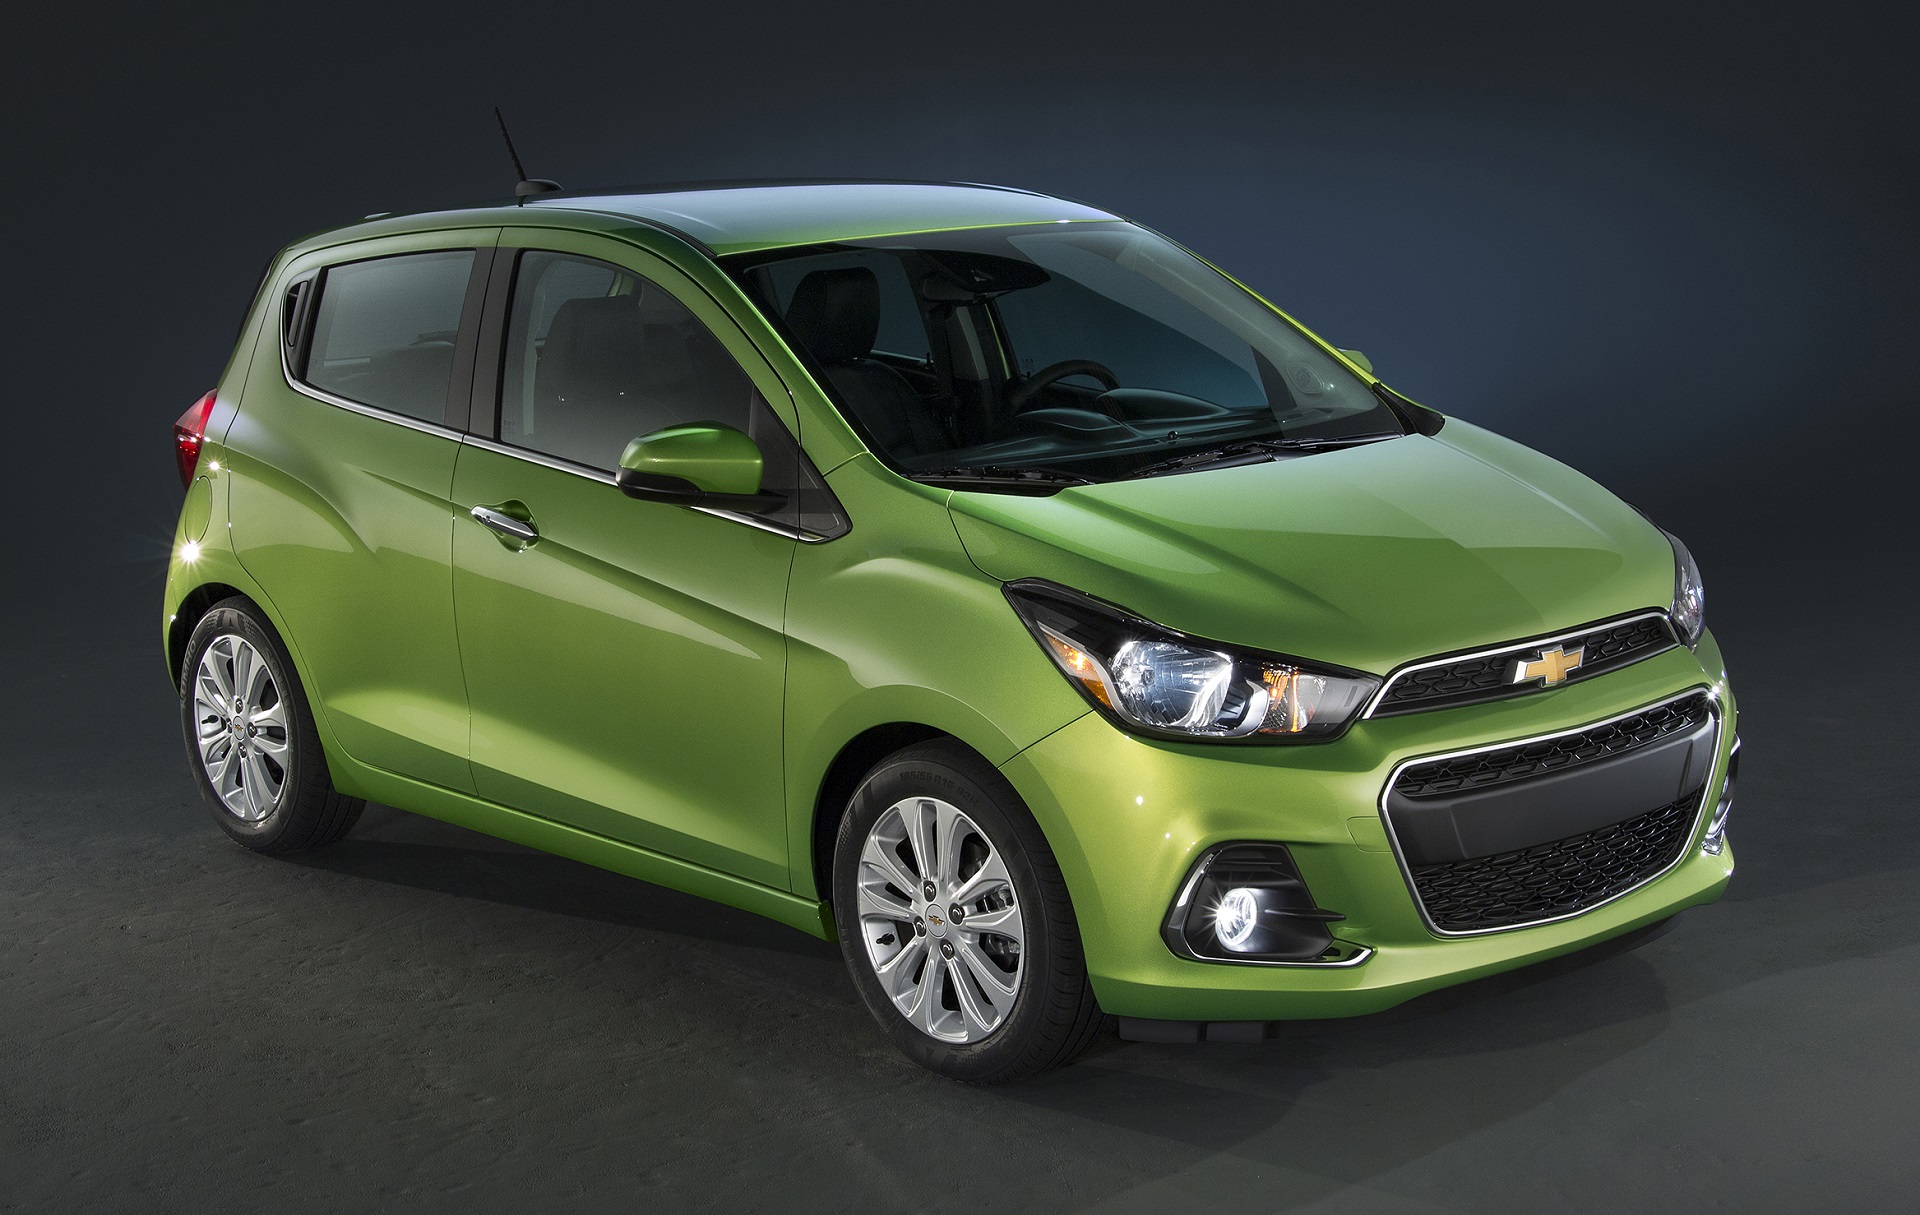 2018 Chevrolet Spark (Chevy) Review, Ratings, Specs, Prices, and Photos -  The Car Connection